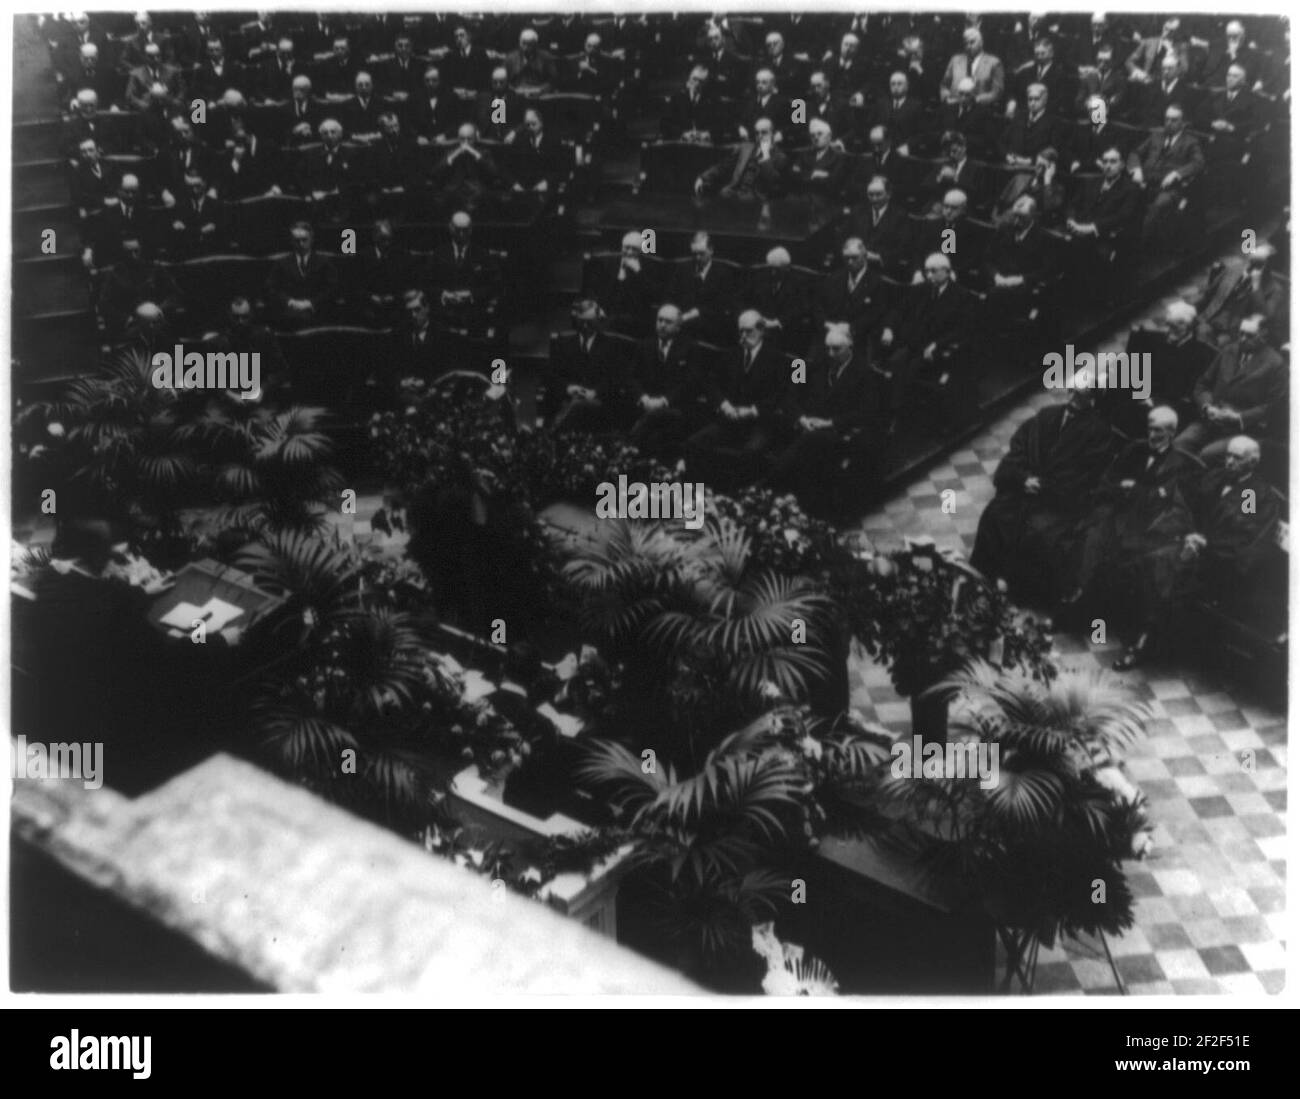 President Warren G. Harding, members of his cabinet, members of the Supreme Court, and other officials, at funeral of Congressman James R. Mann, in the U.S. House of Representatives, Stock Photo